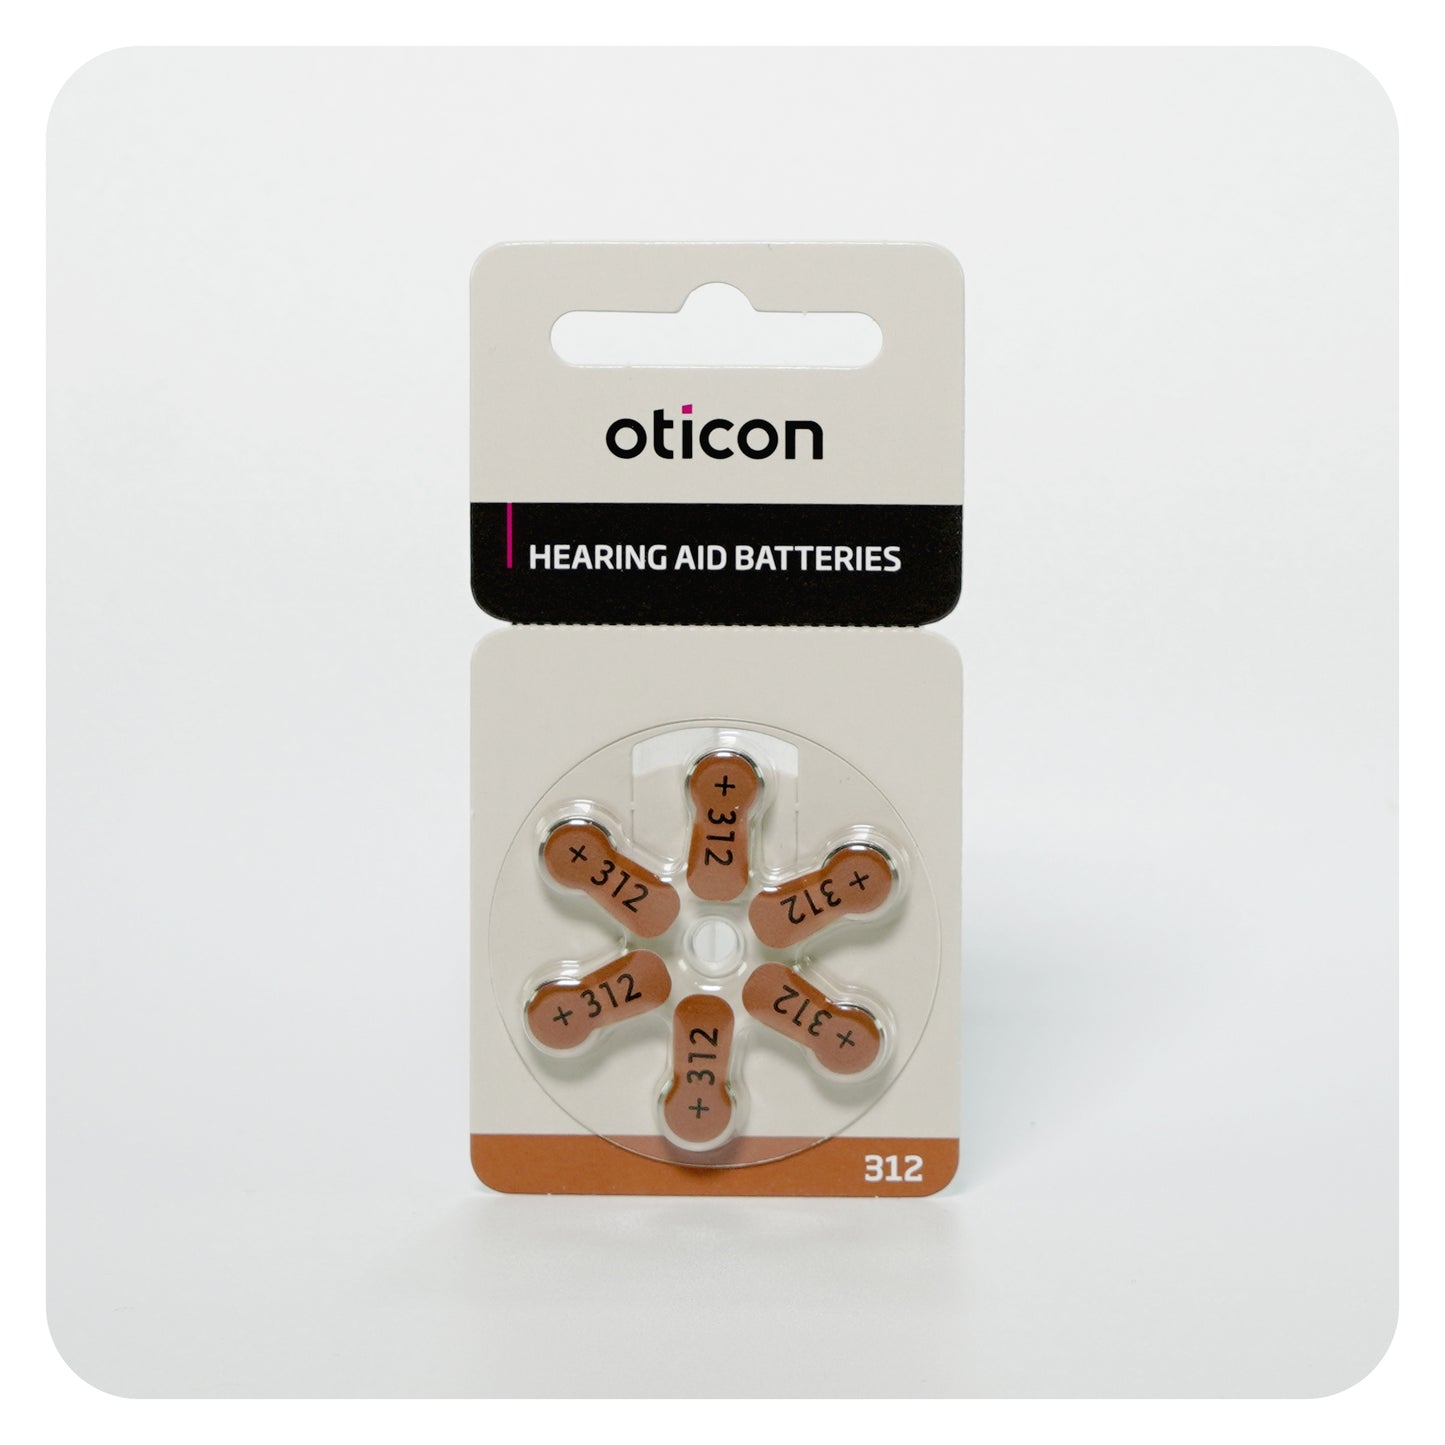 Oticon Hearing Aid Battery Pack - Size 312